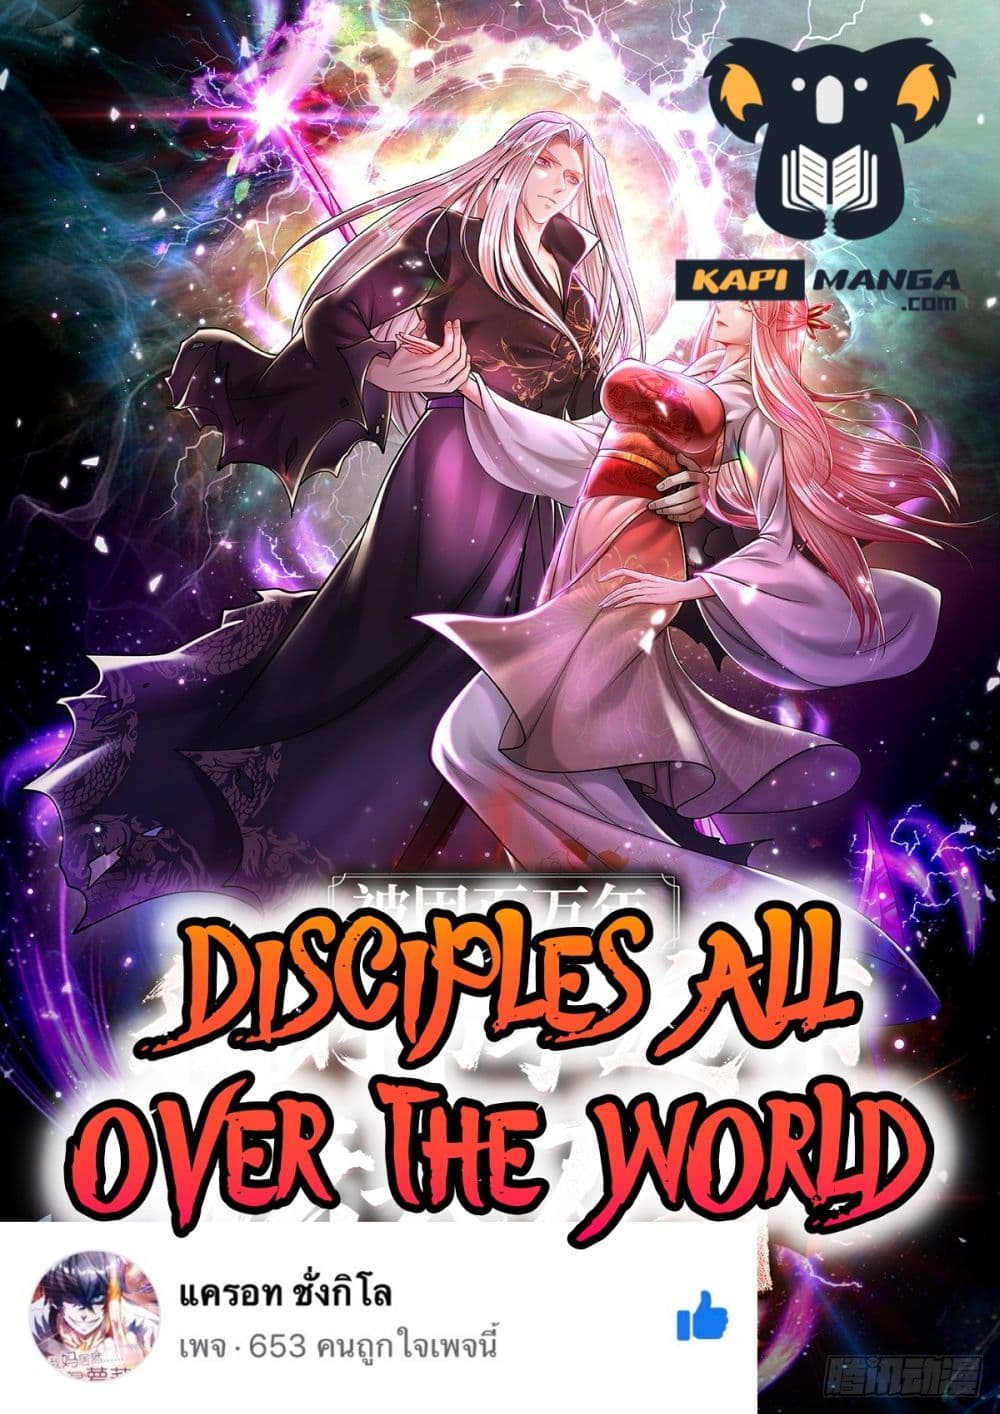 Disciples All Over the World à¸à¸­à¸à¸à¸µà¹ 66 (1)